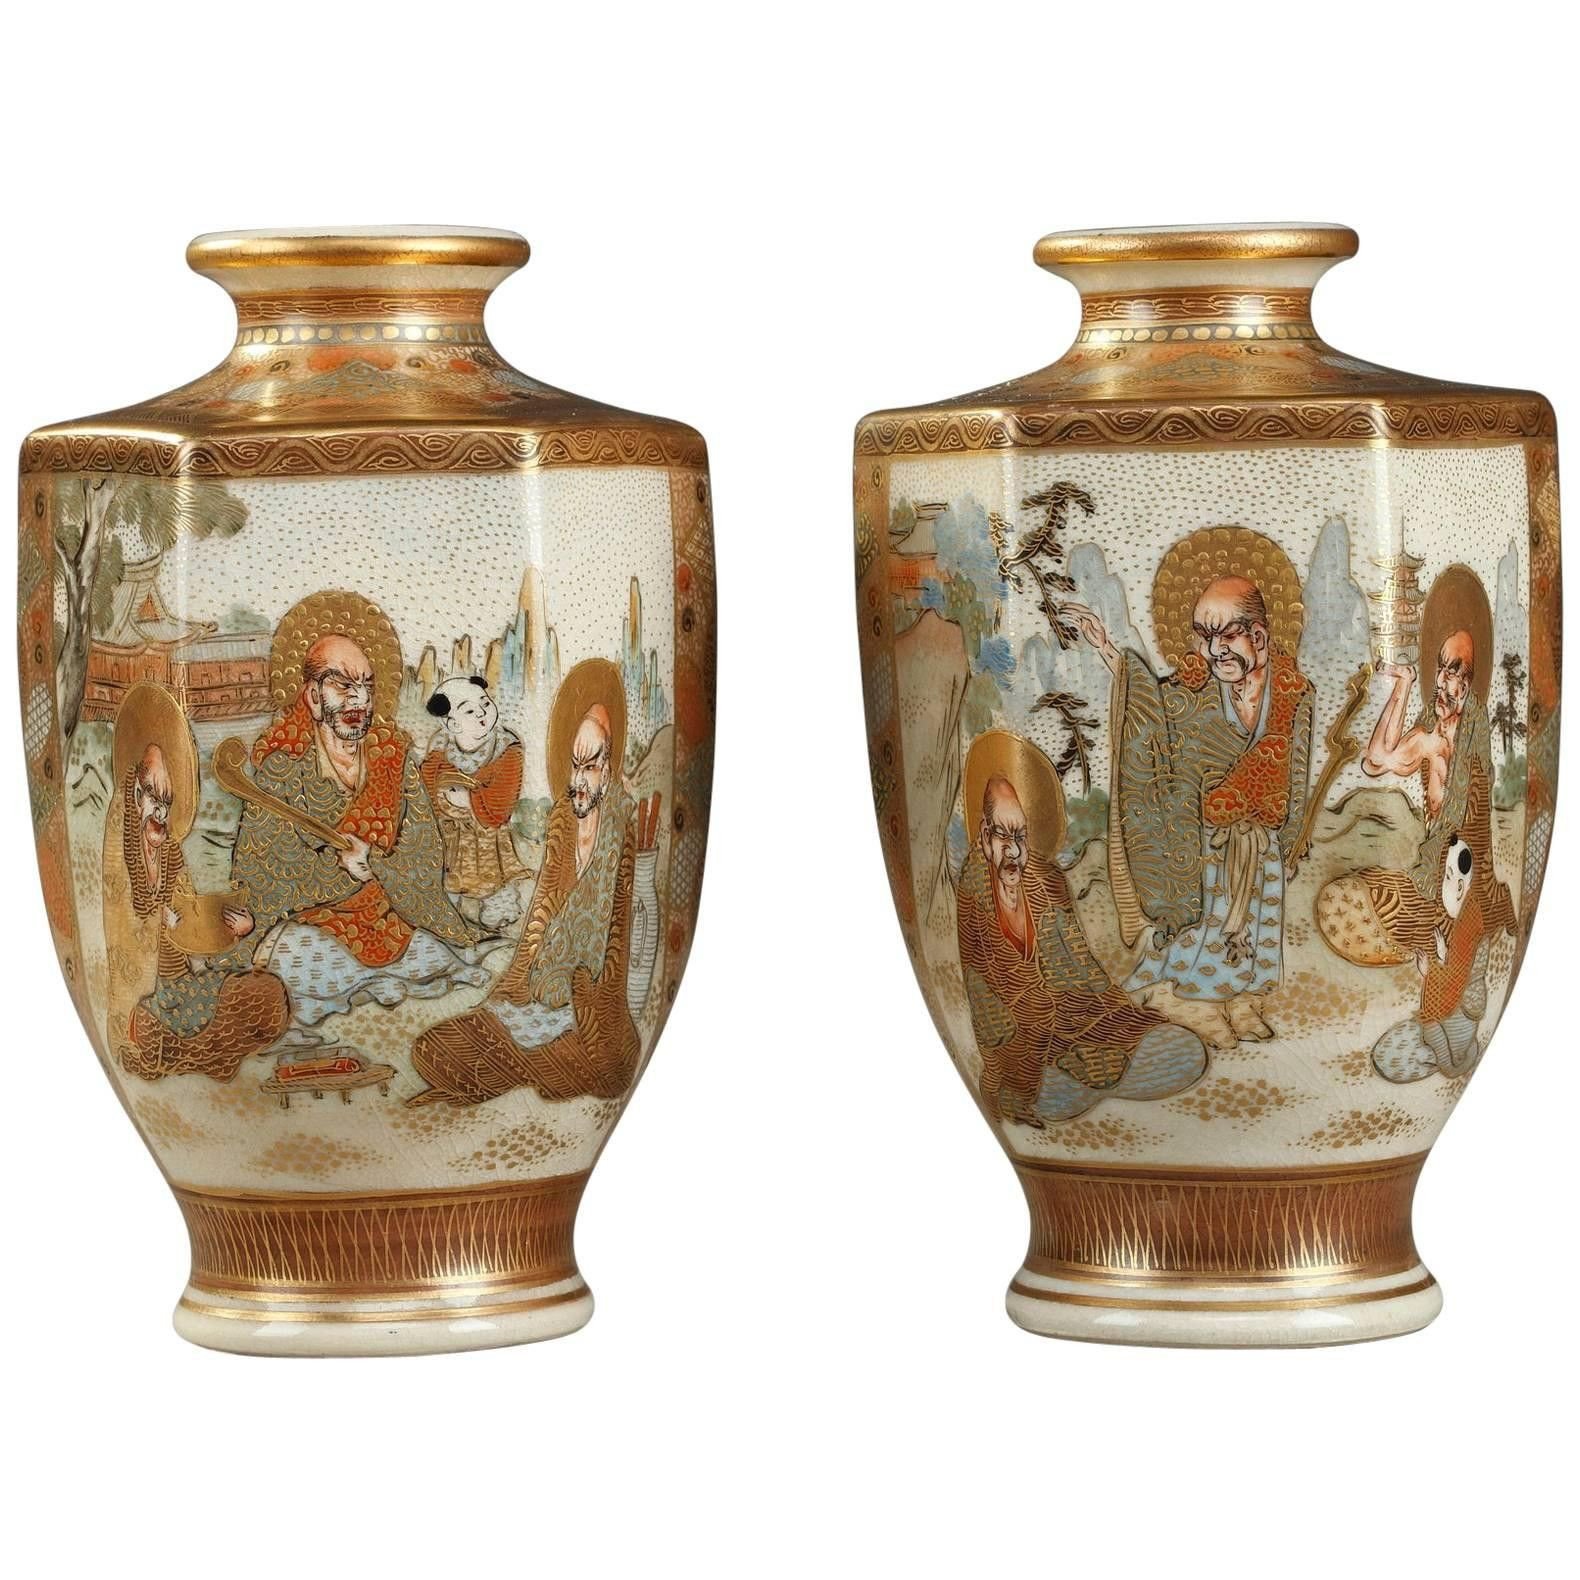 21 Lovable Rustic Pottery Vases 2024 free download rustic pottery vases of 18 mid century glass vase the weekly world in chinese ginger jar table lamps new vases chinese vase with lid